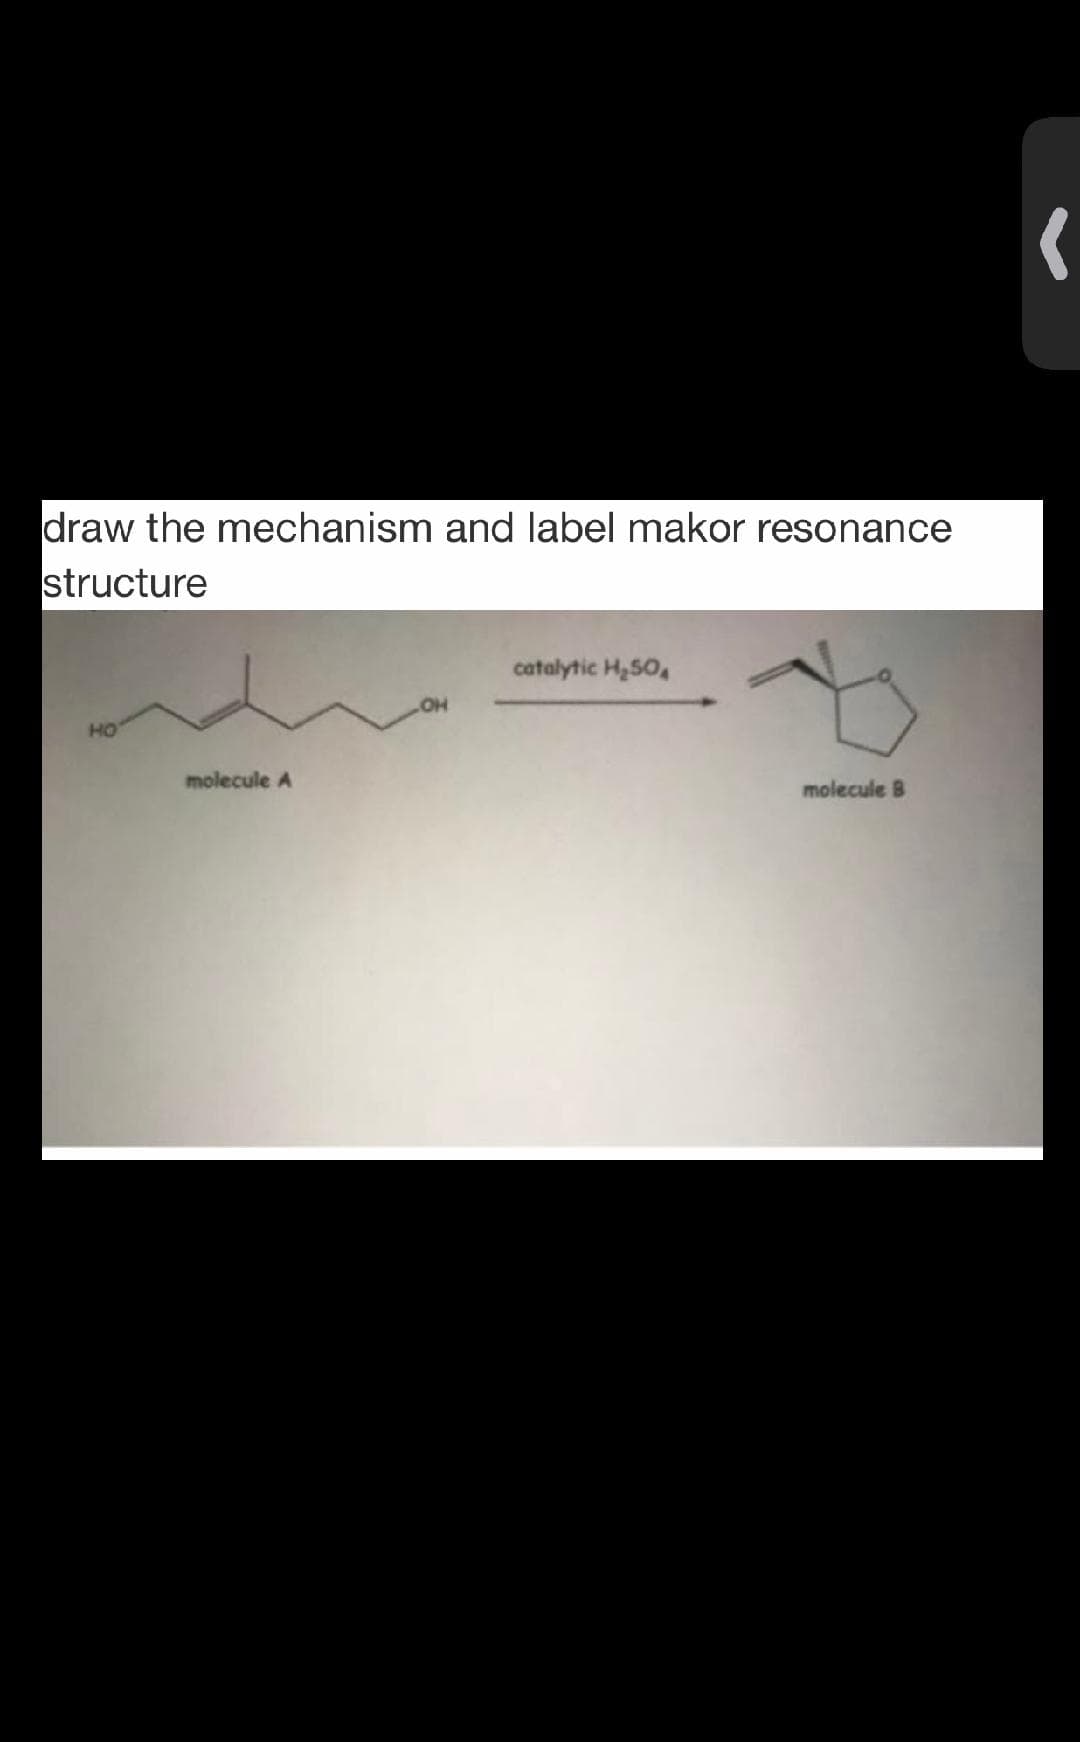 draw the mechanism and label makor resonance
structure
catalytic H,50,
HO
molecule A
molecule B
